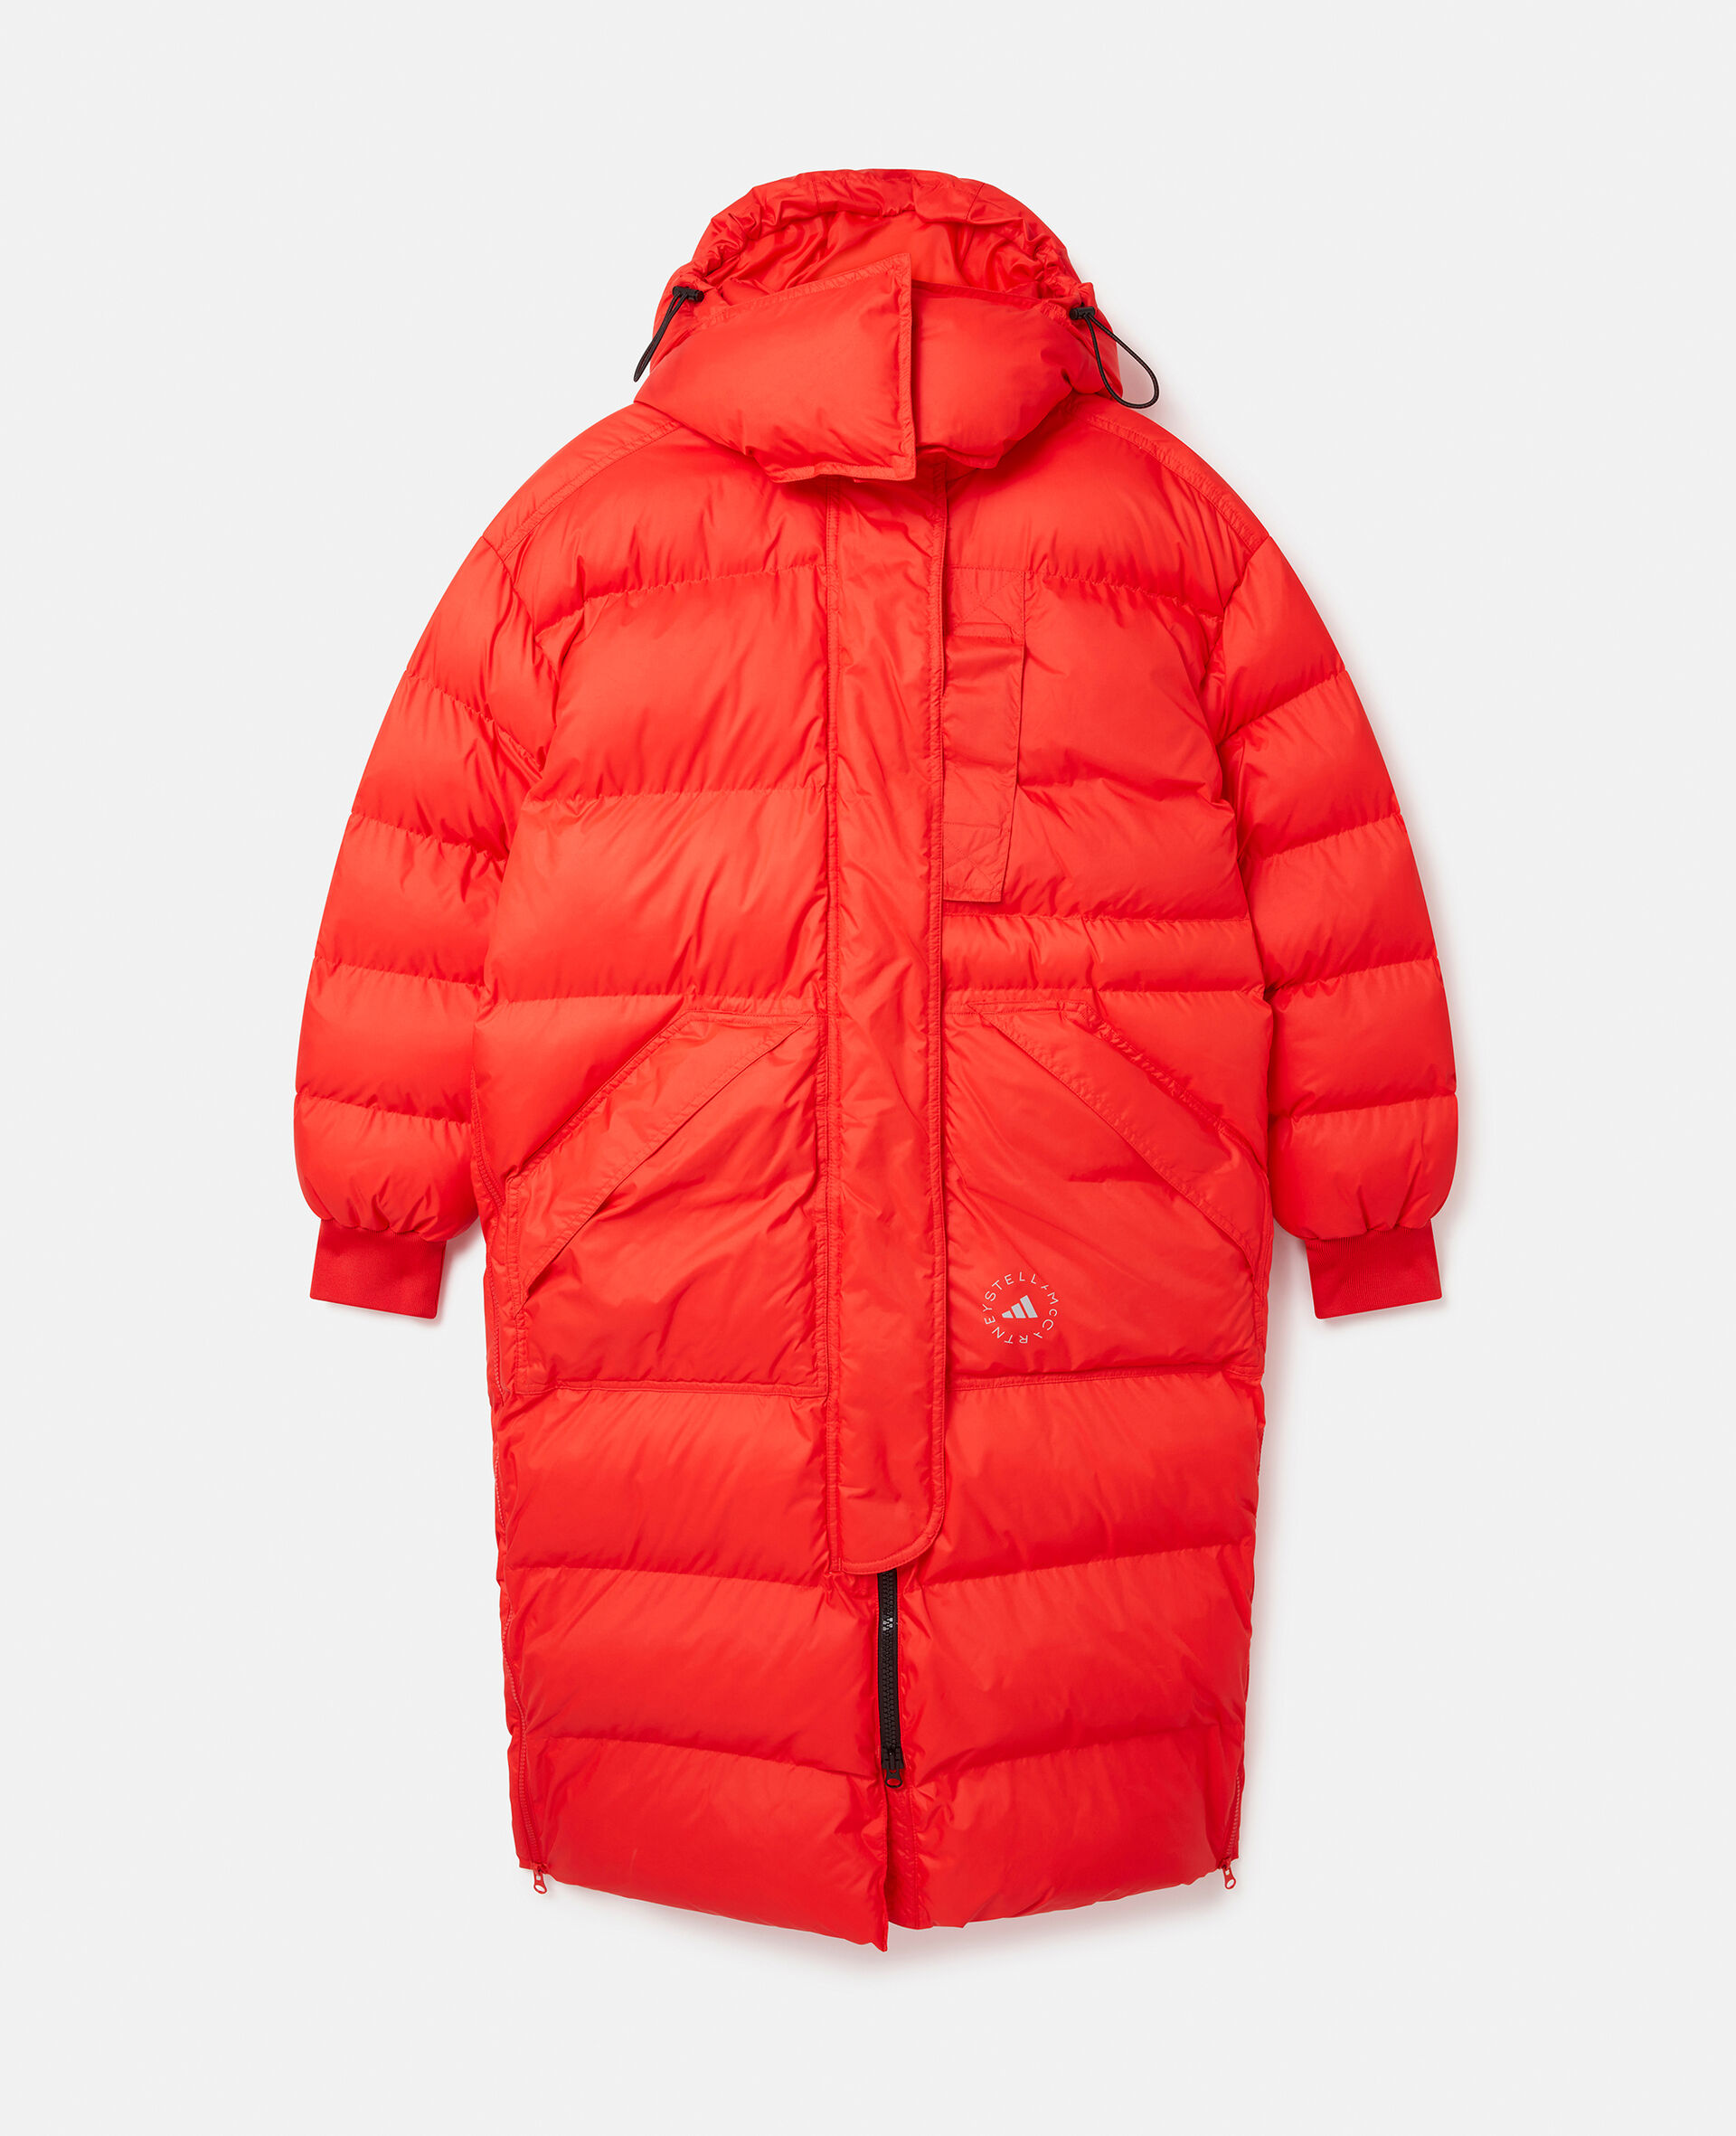 TrueNature Long Padded Coat-Red-large image number 0